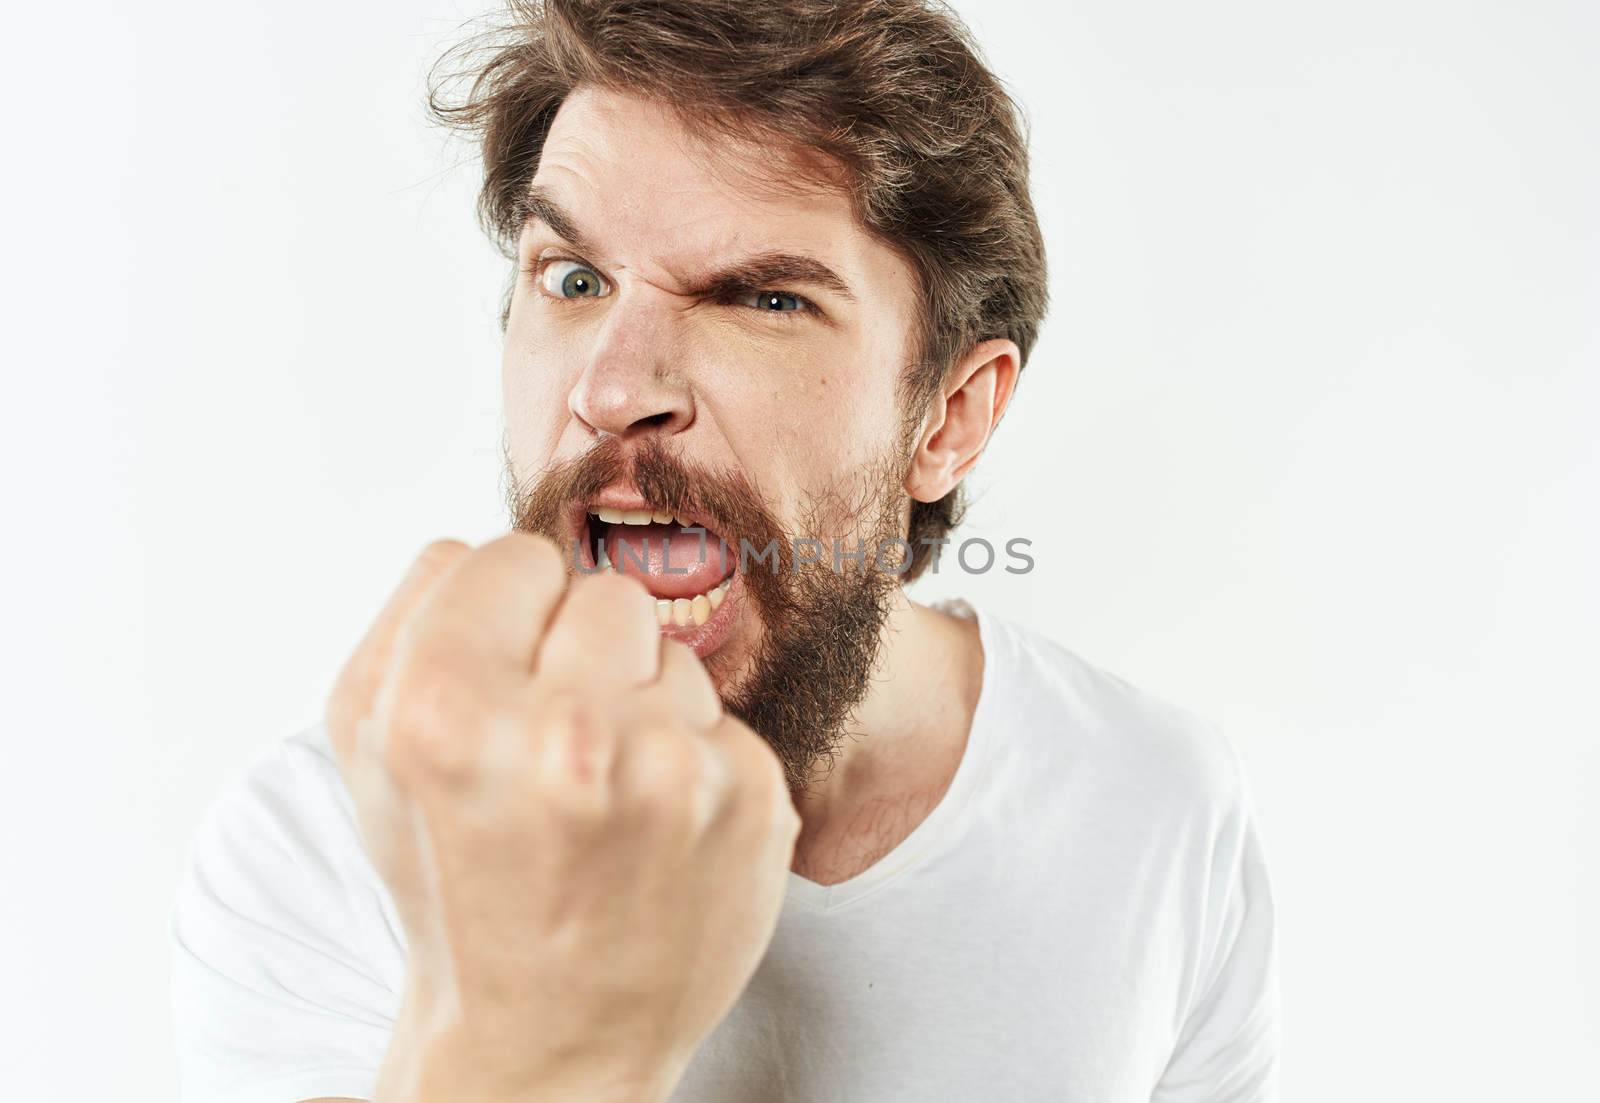 Angry man in a white t-shirt shows a fist gesturing with his hands to the model by SHOTPRIME